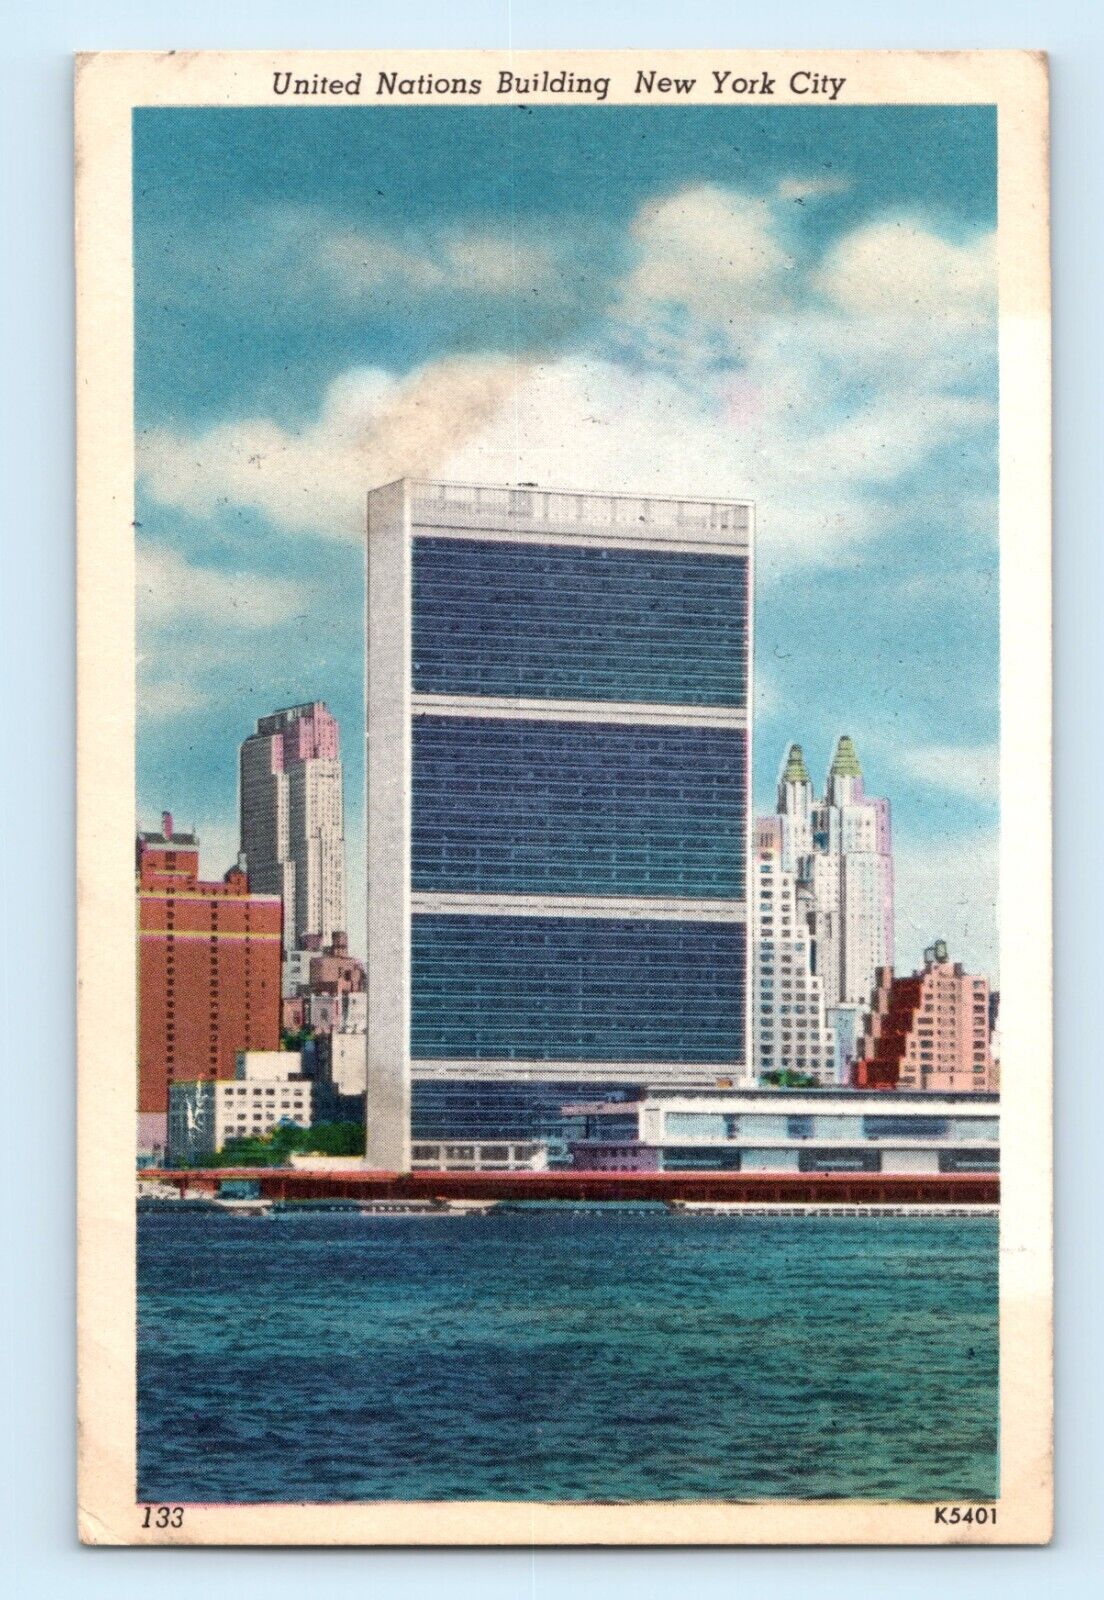 United Nations Building Seen Long Is New York City NY Linen Vintage Postcard C2